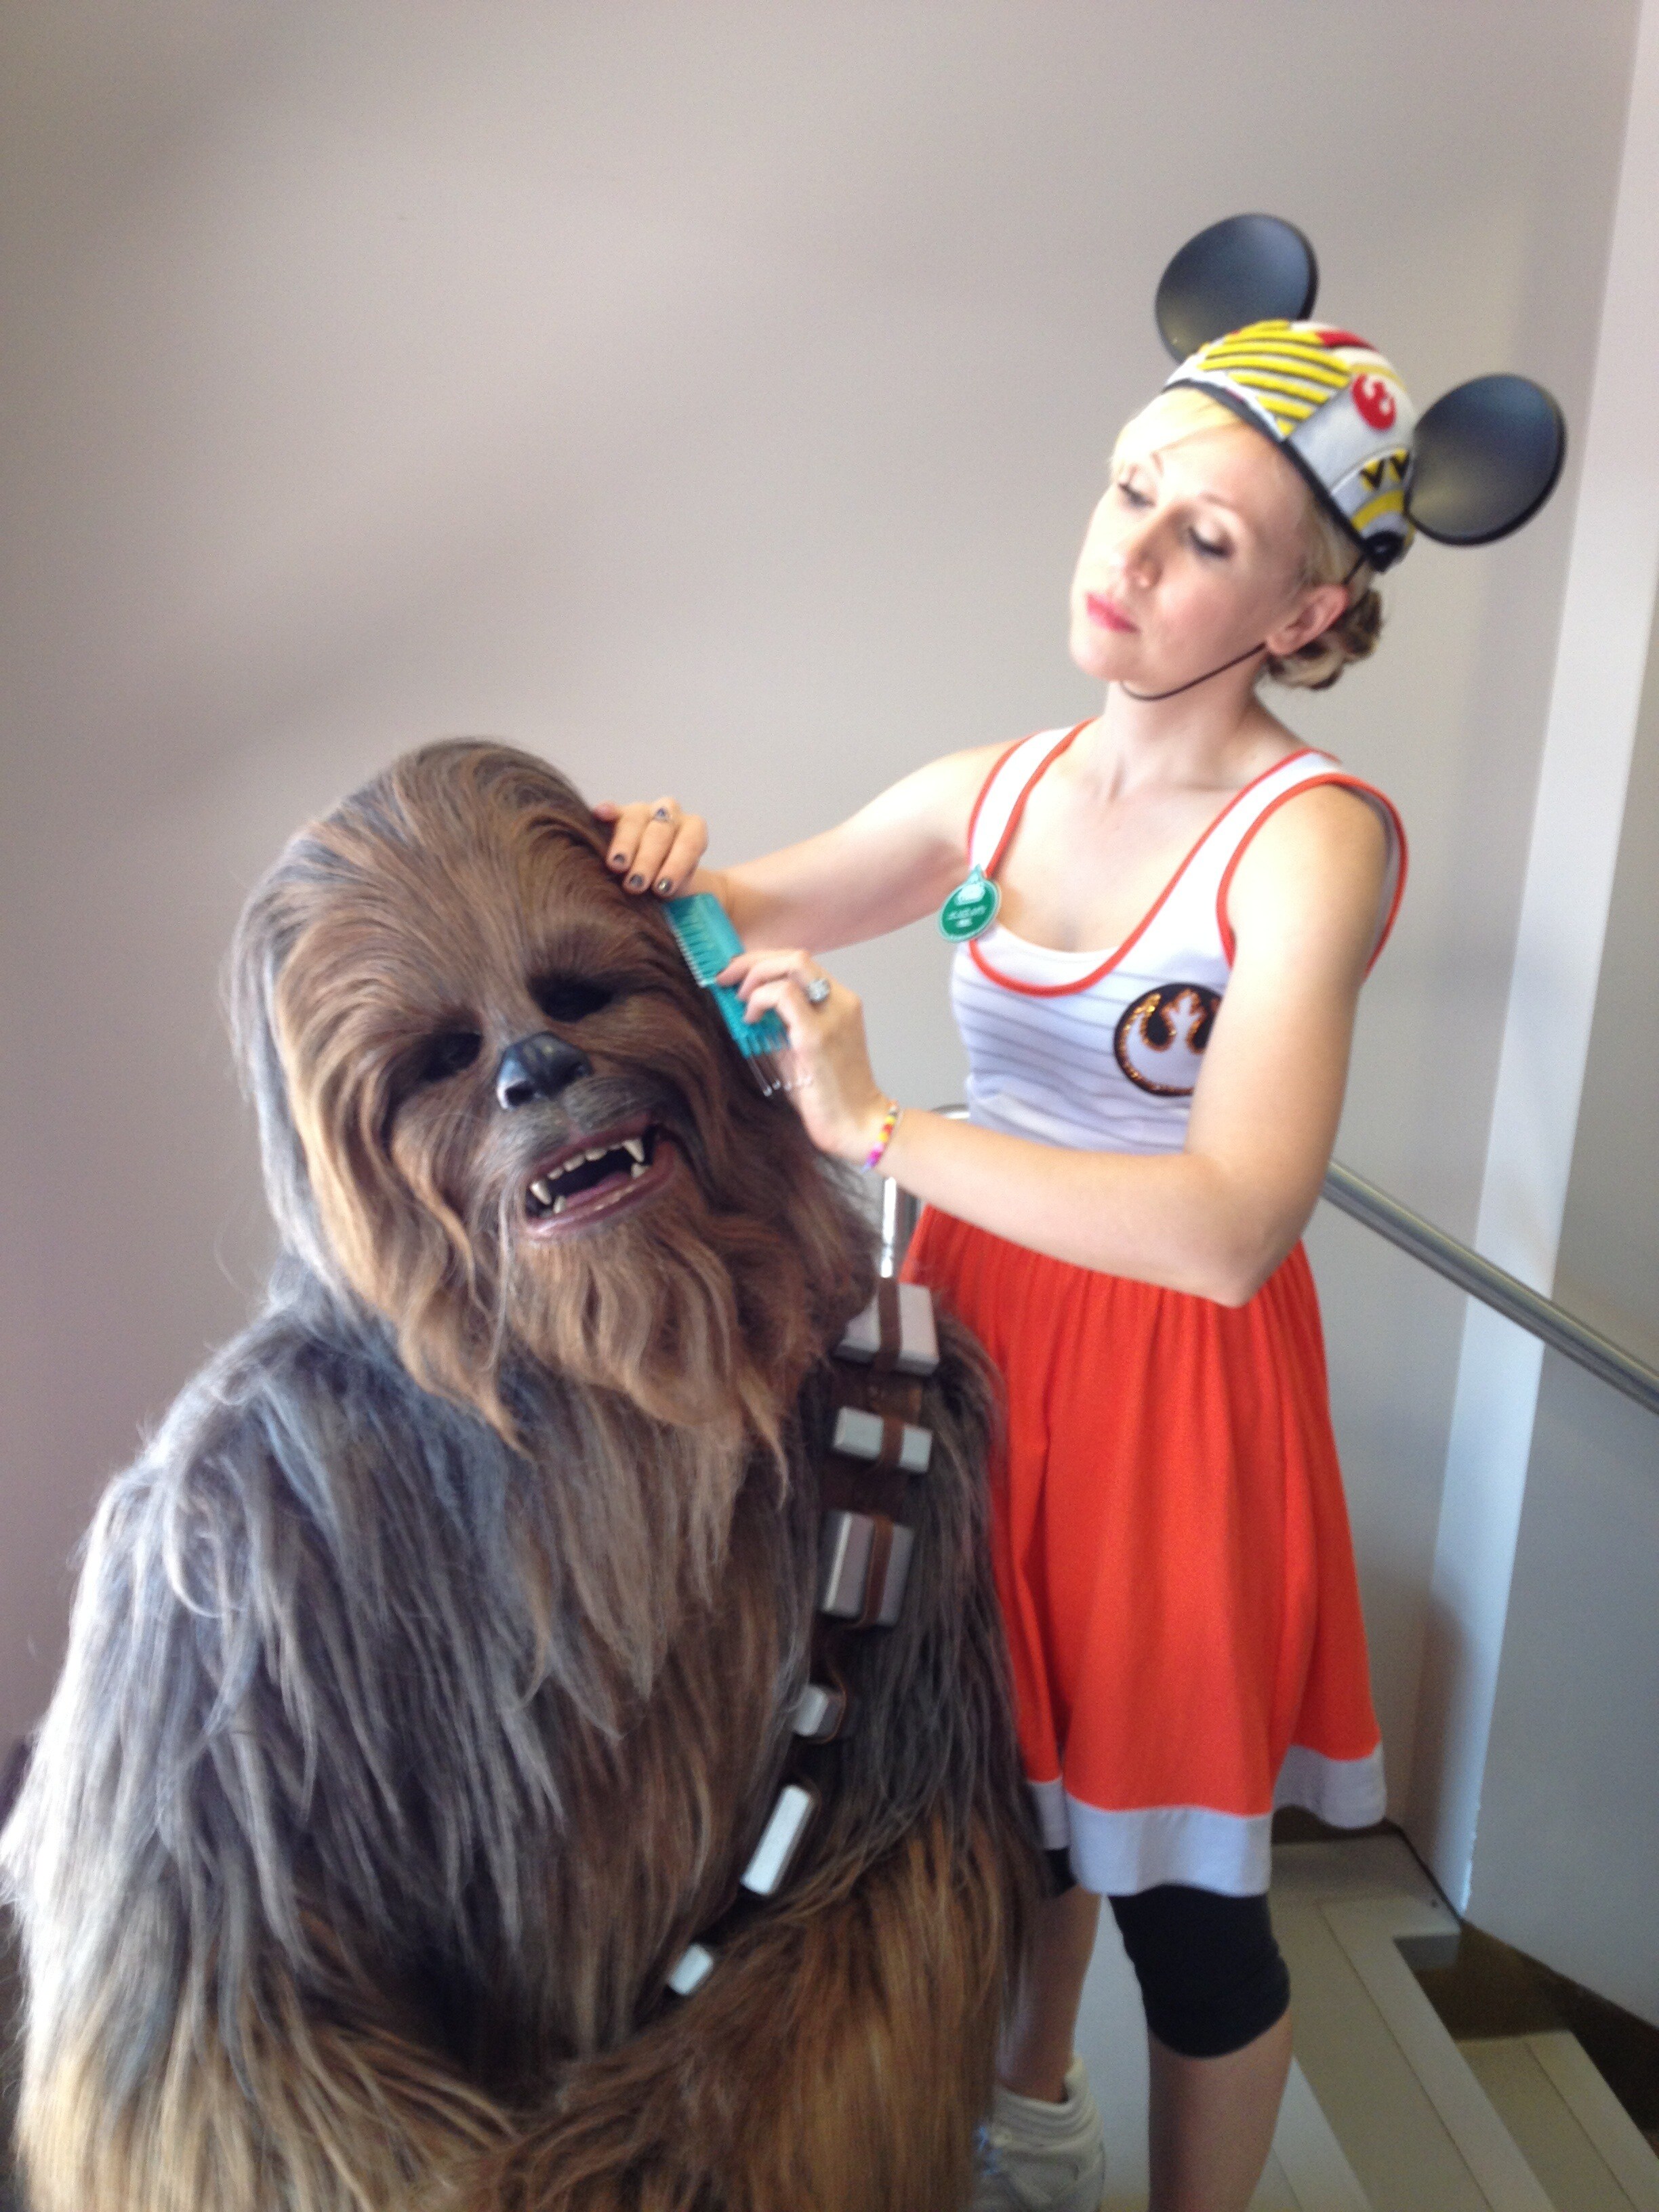 Chewie was there for me during SWW to lend an ear...he gives great advice!